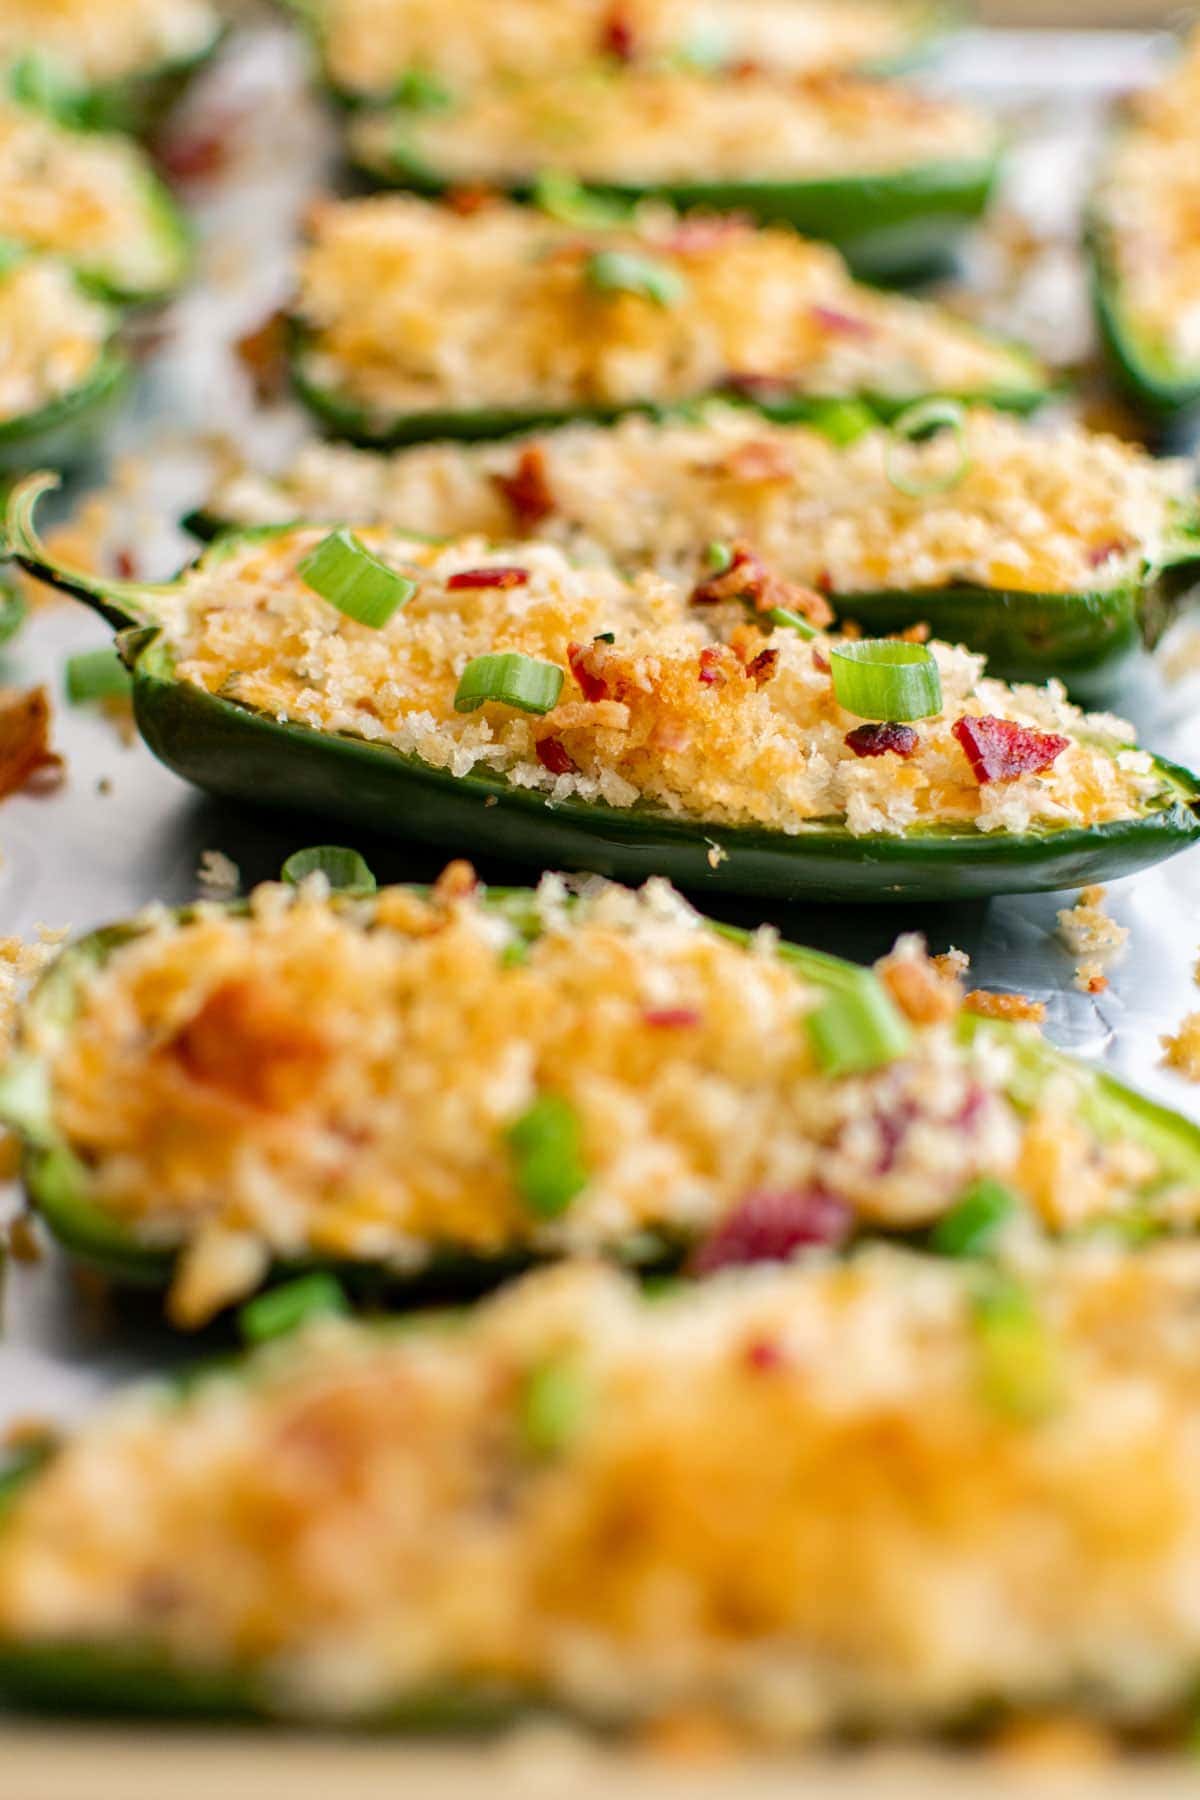 jalapeno halves with breadcrumbs on top and parsley